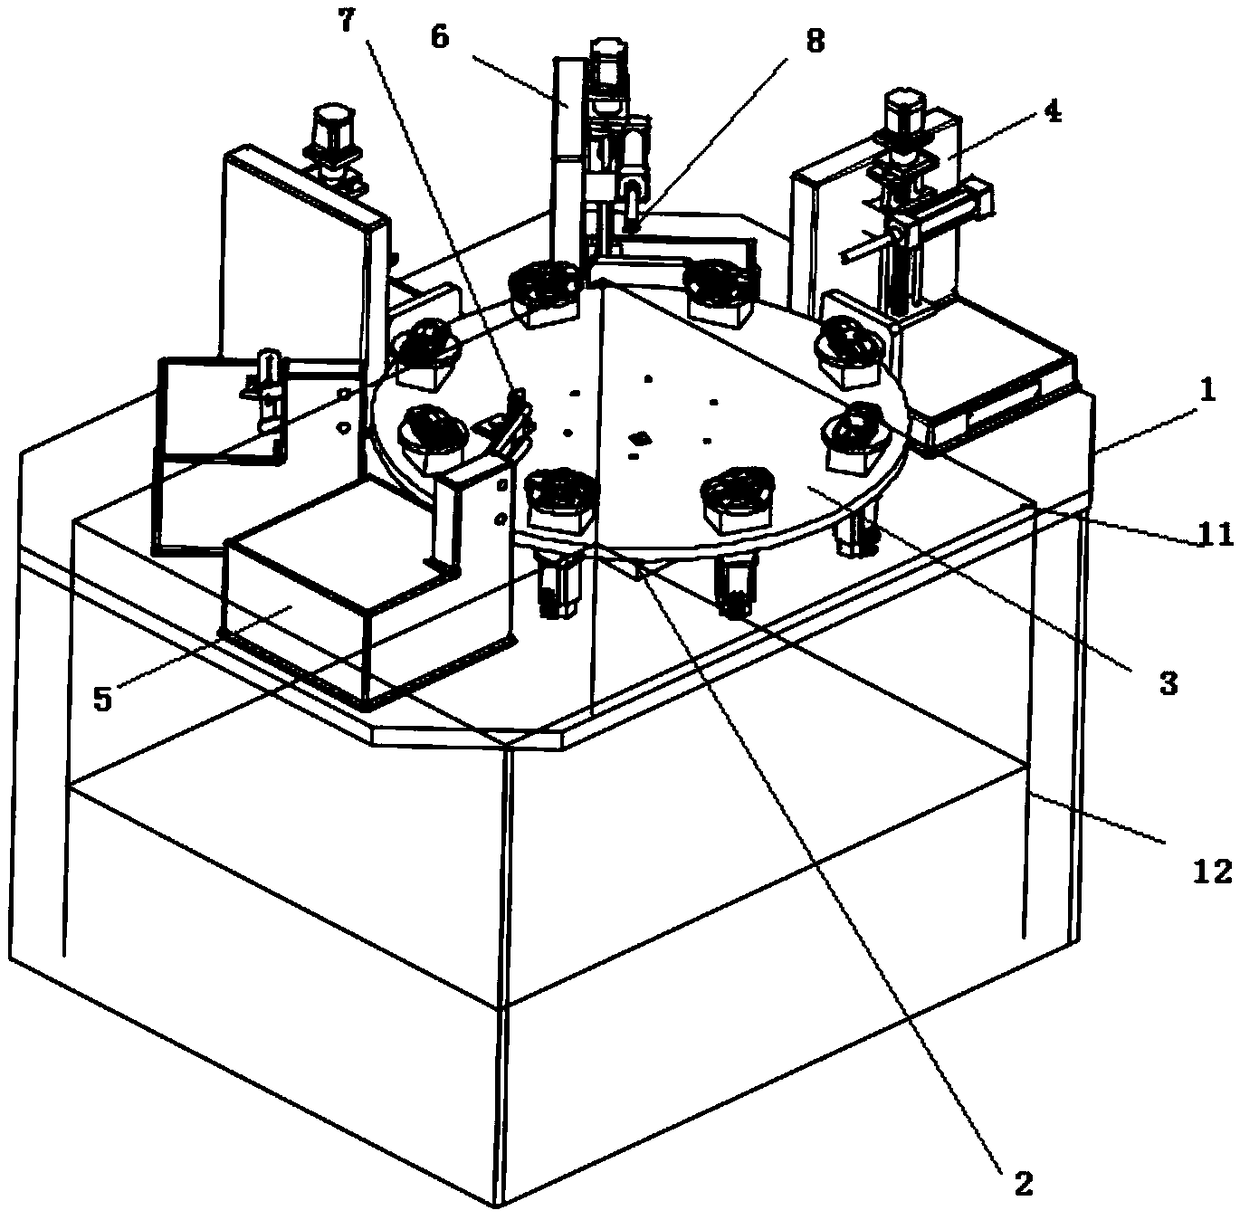 A casting surface treatment device